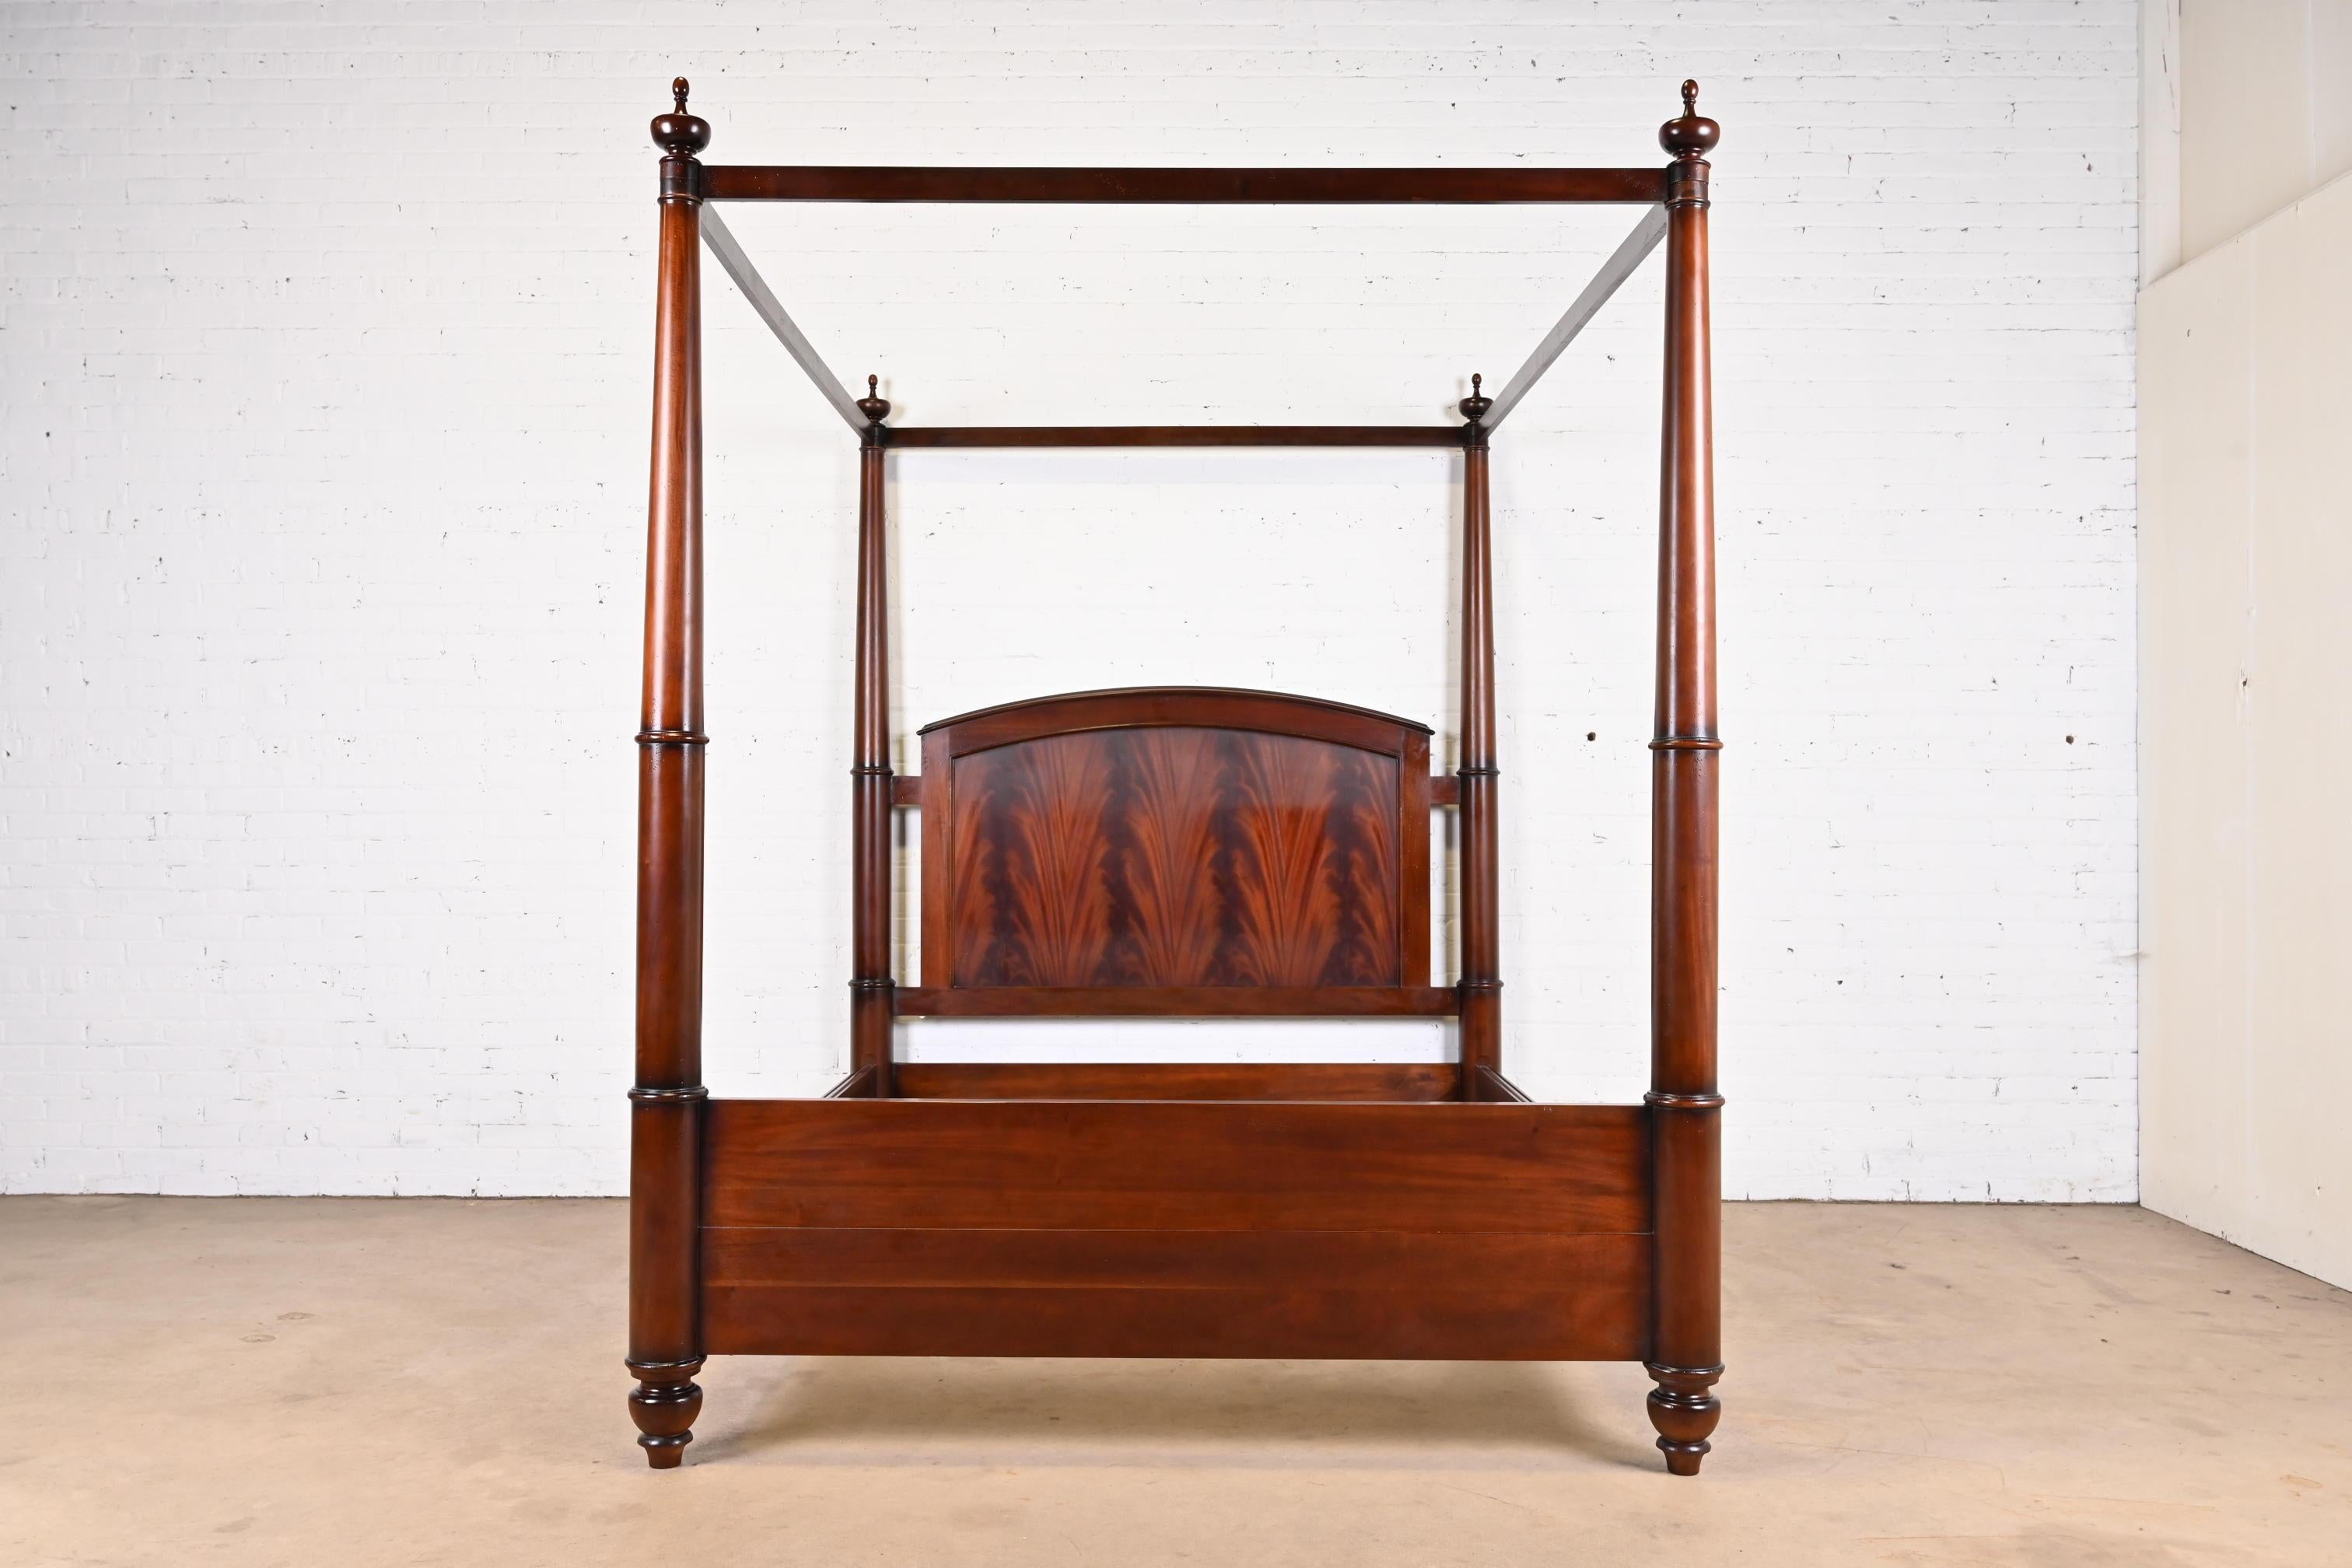 A gorgeous Georgian or Federal style flame mahogany four poster queen size tester bed

By Baker Furniture, 